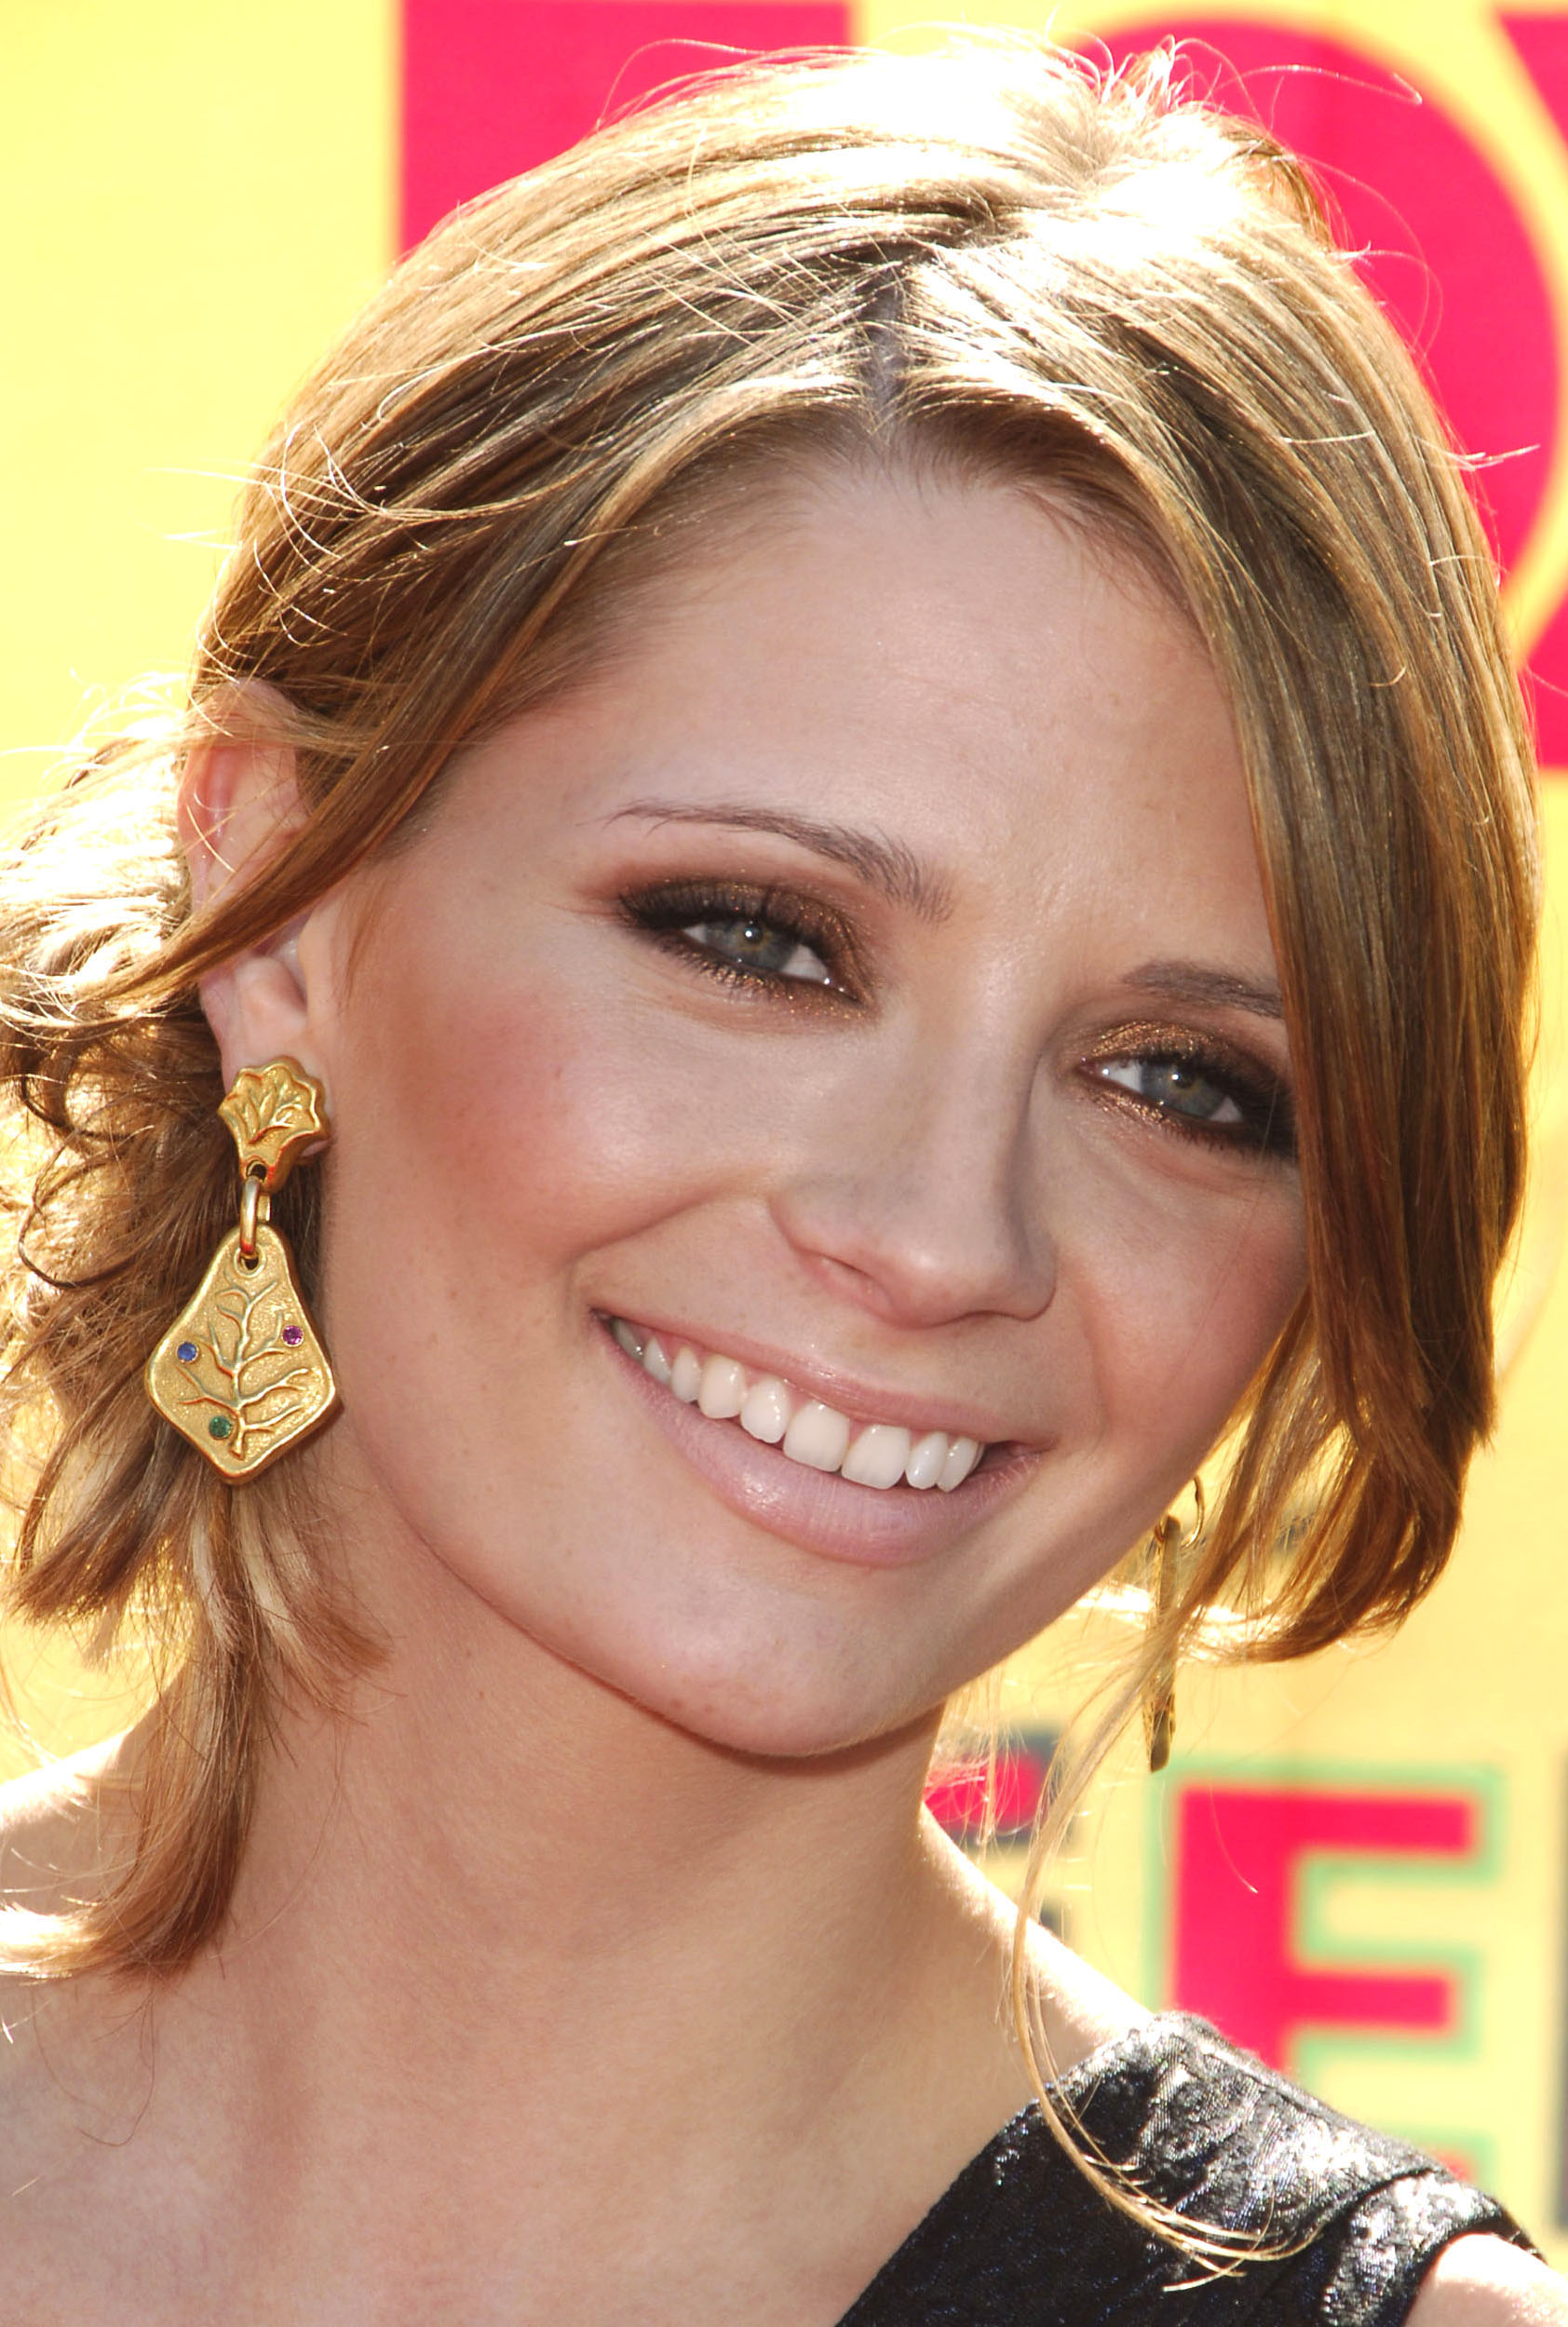 Mischa Barton is pictured during the 2006 Teens Choice Awards at the Gibson Amphitheatre in Universal City, California | Source: Getty Images